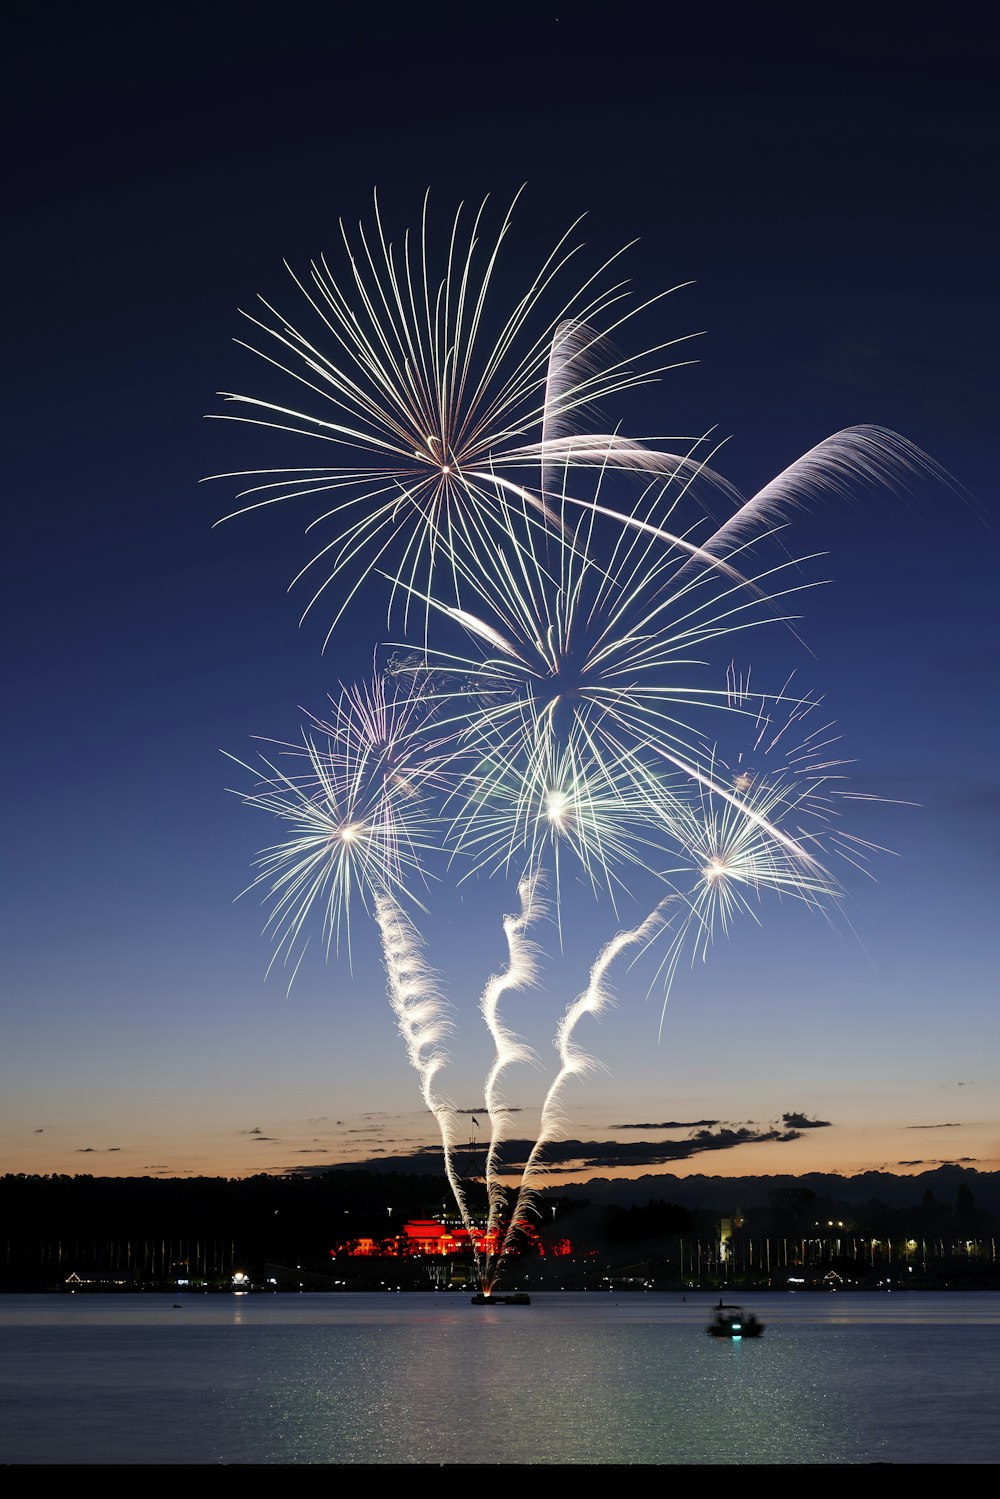 a fireworks display in the sky over a body of water